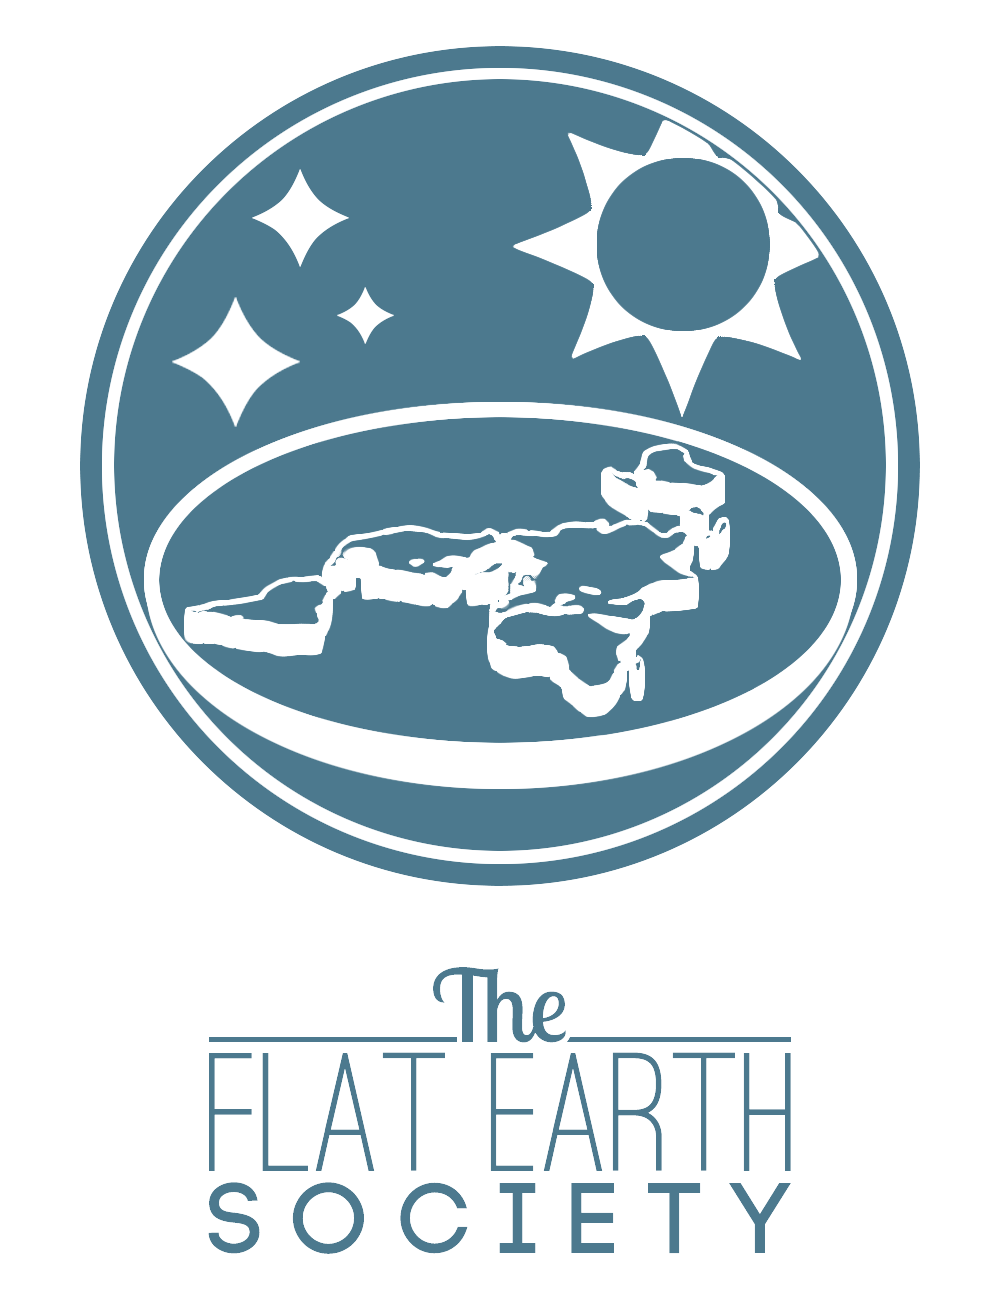 how to prove the earth is flat